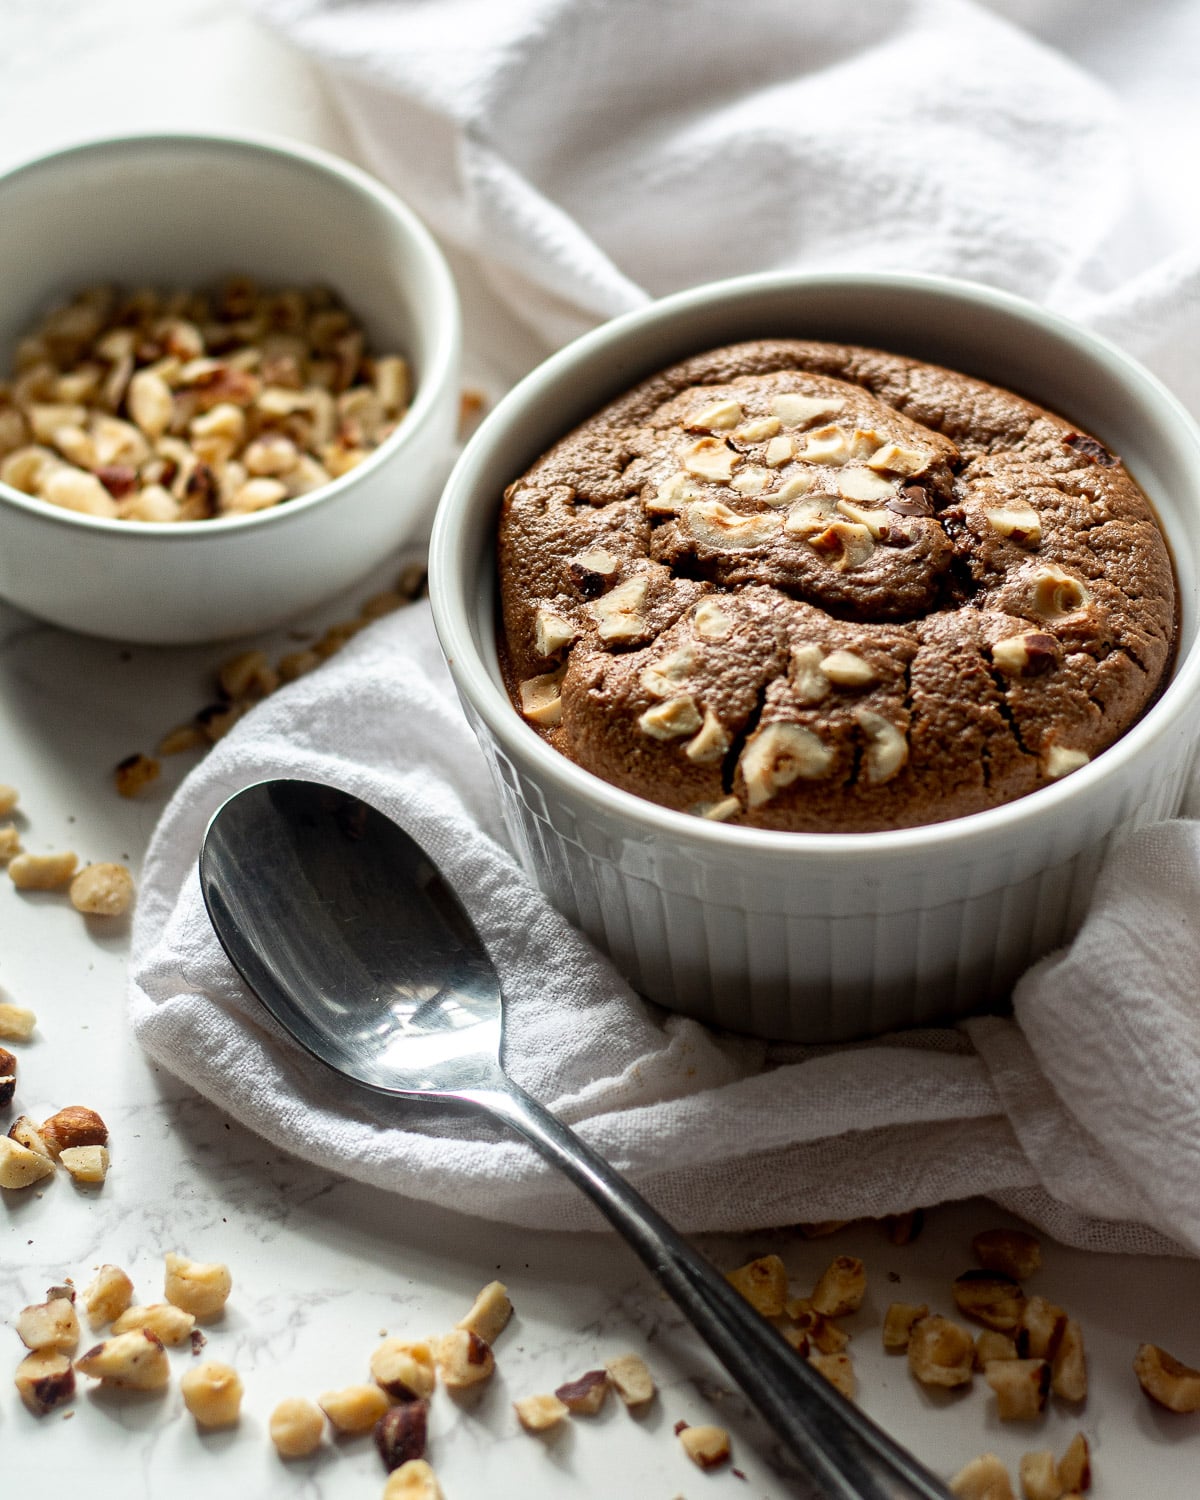 nutella baked oats in the ramekin with hazelnuts in a bowl and scattered around